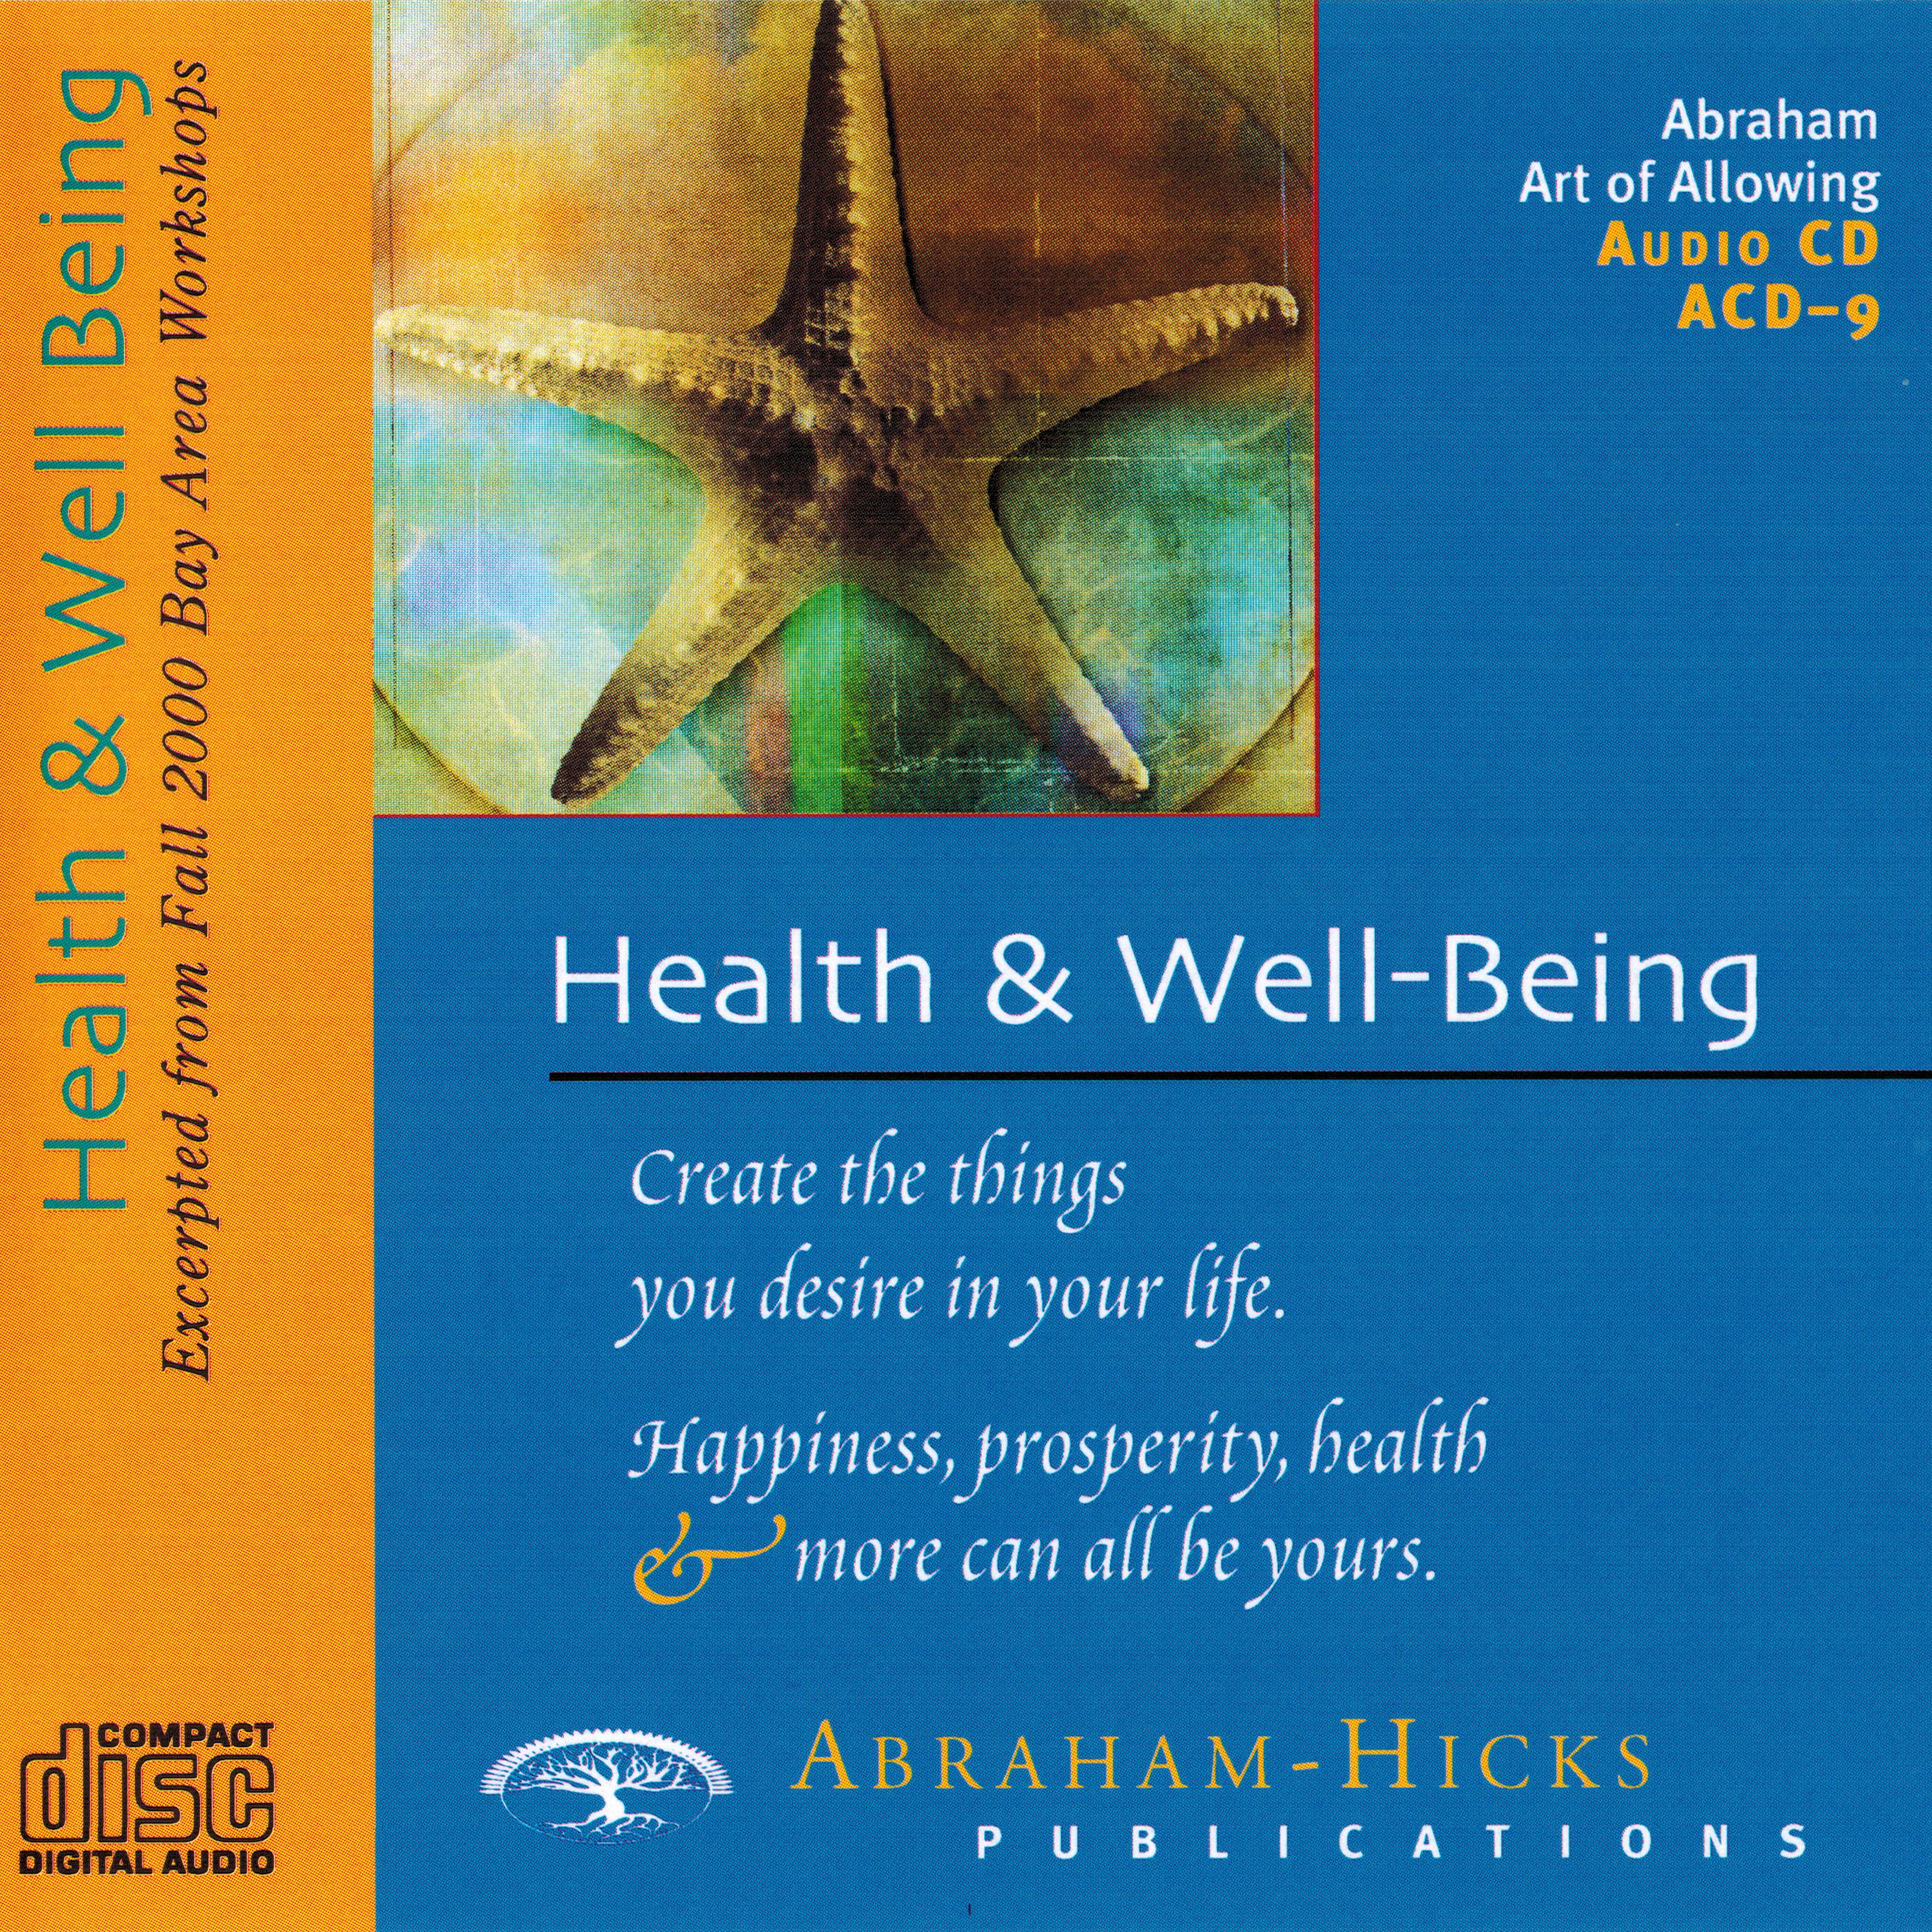 Special Subjects MP3: Health & Well-Being